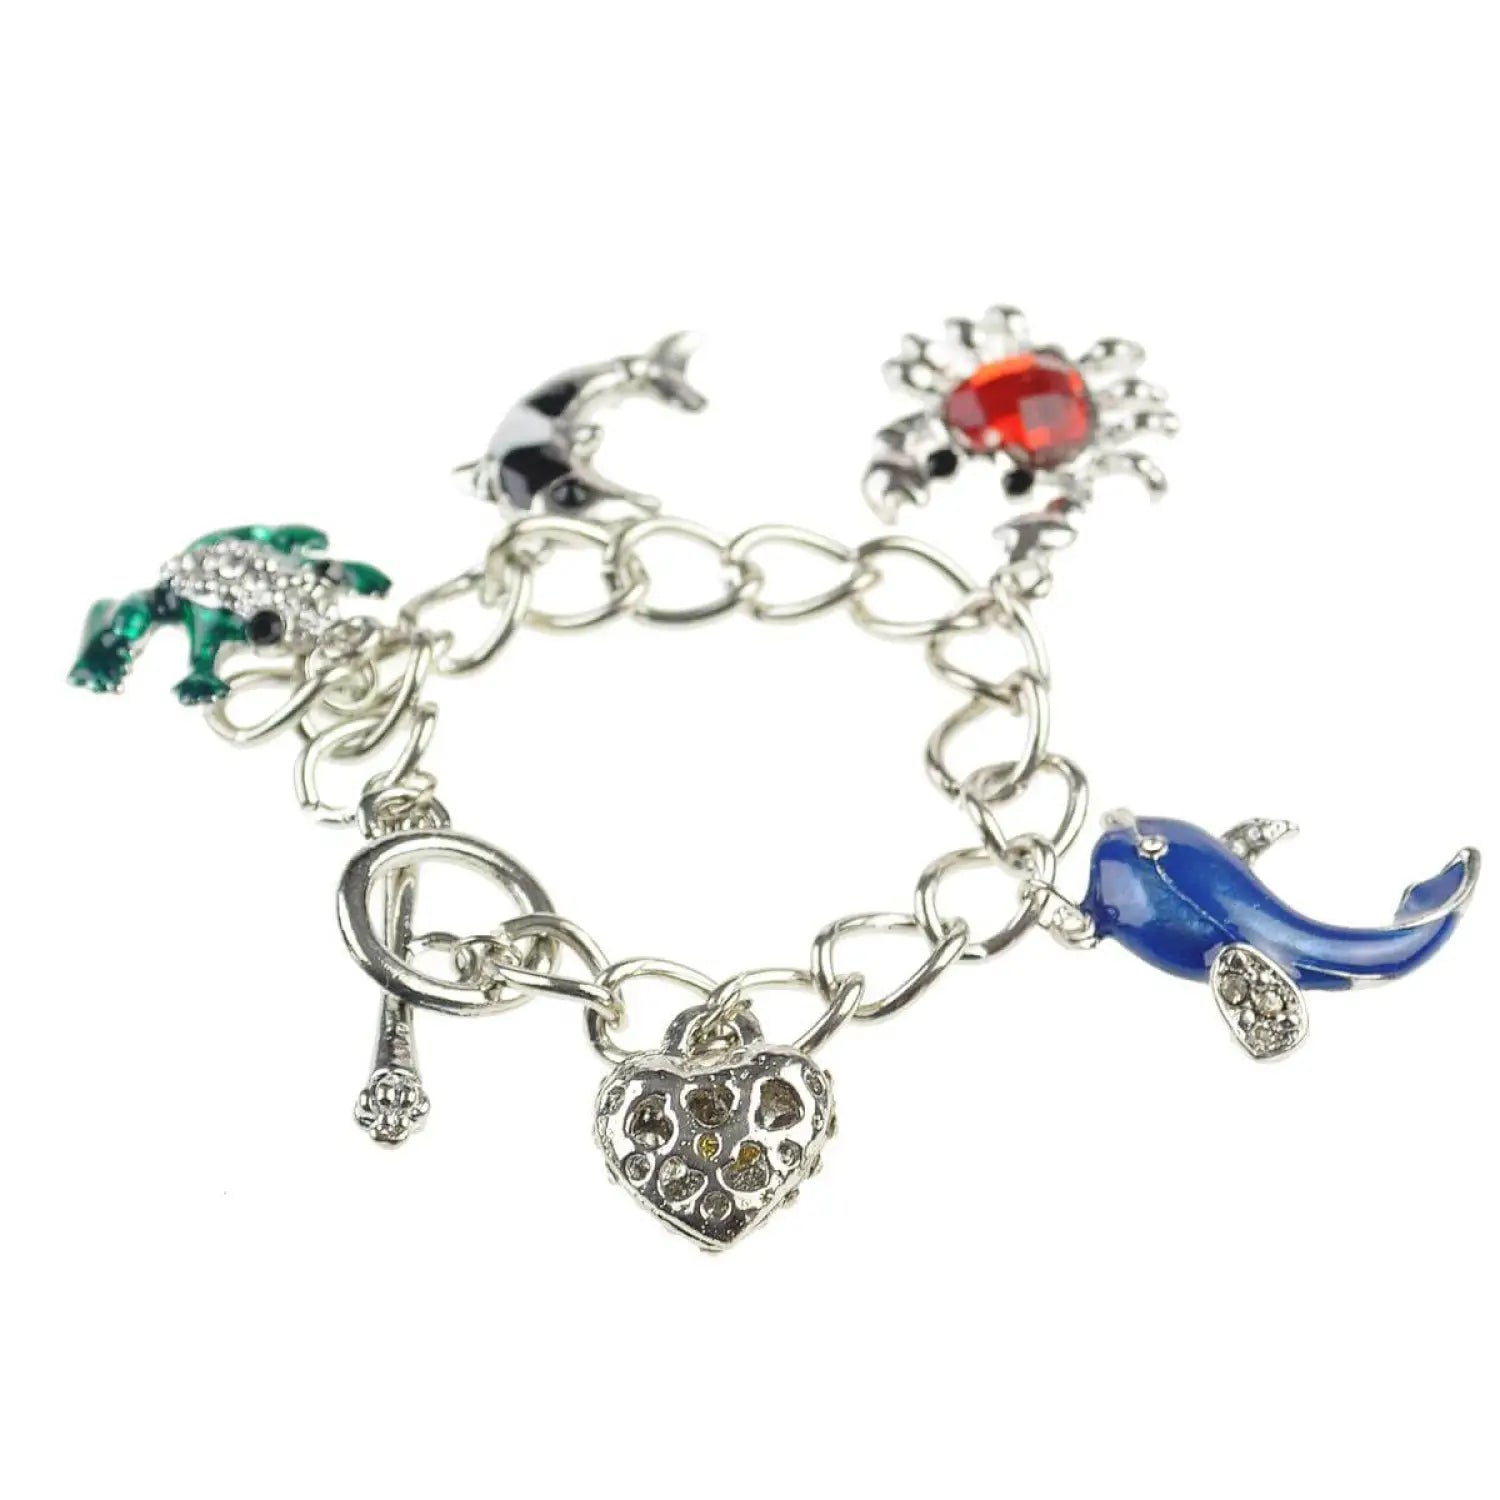 3 Pack Metal Charm Bracelets with Charms